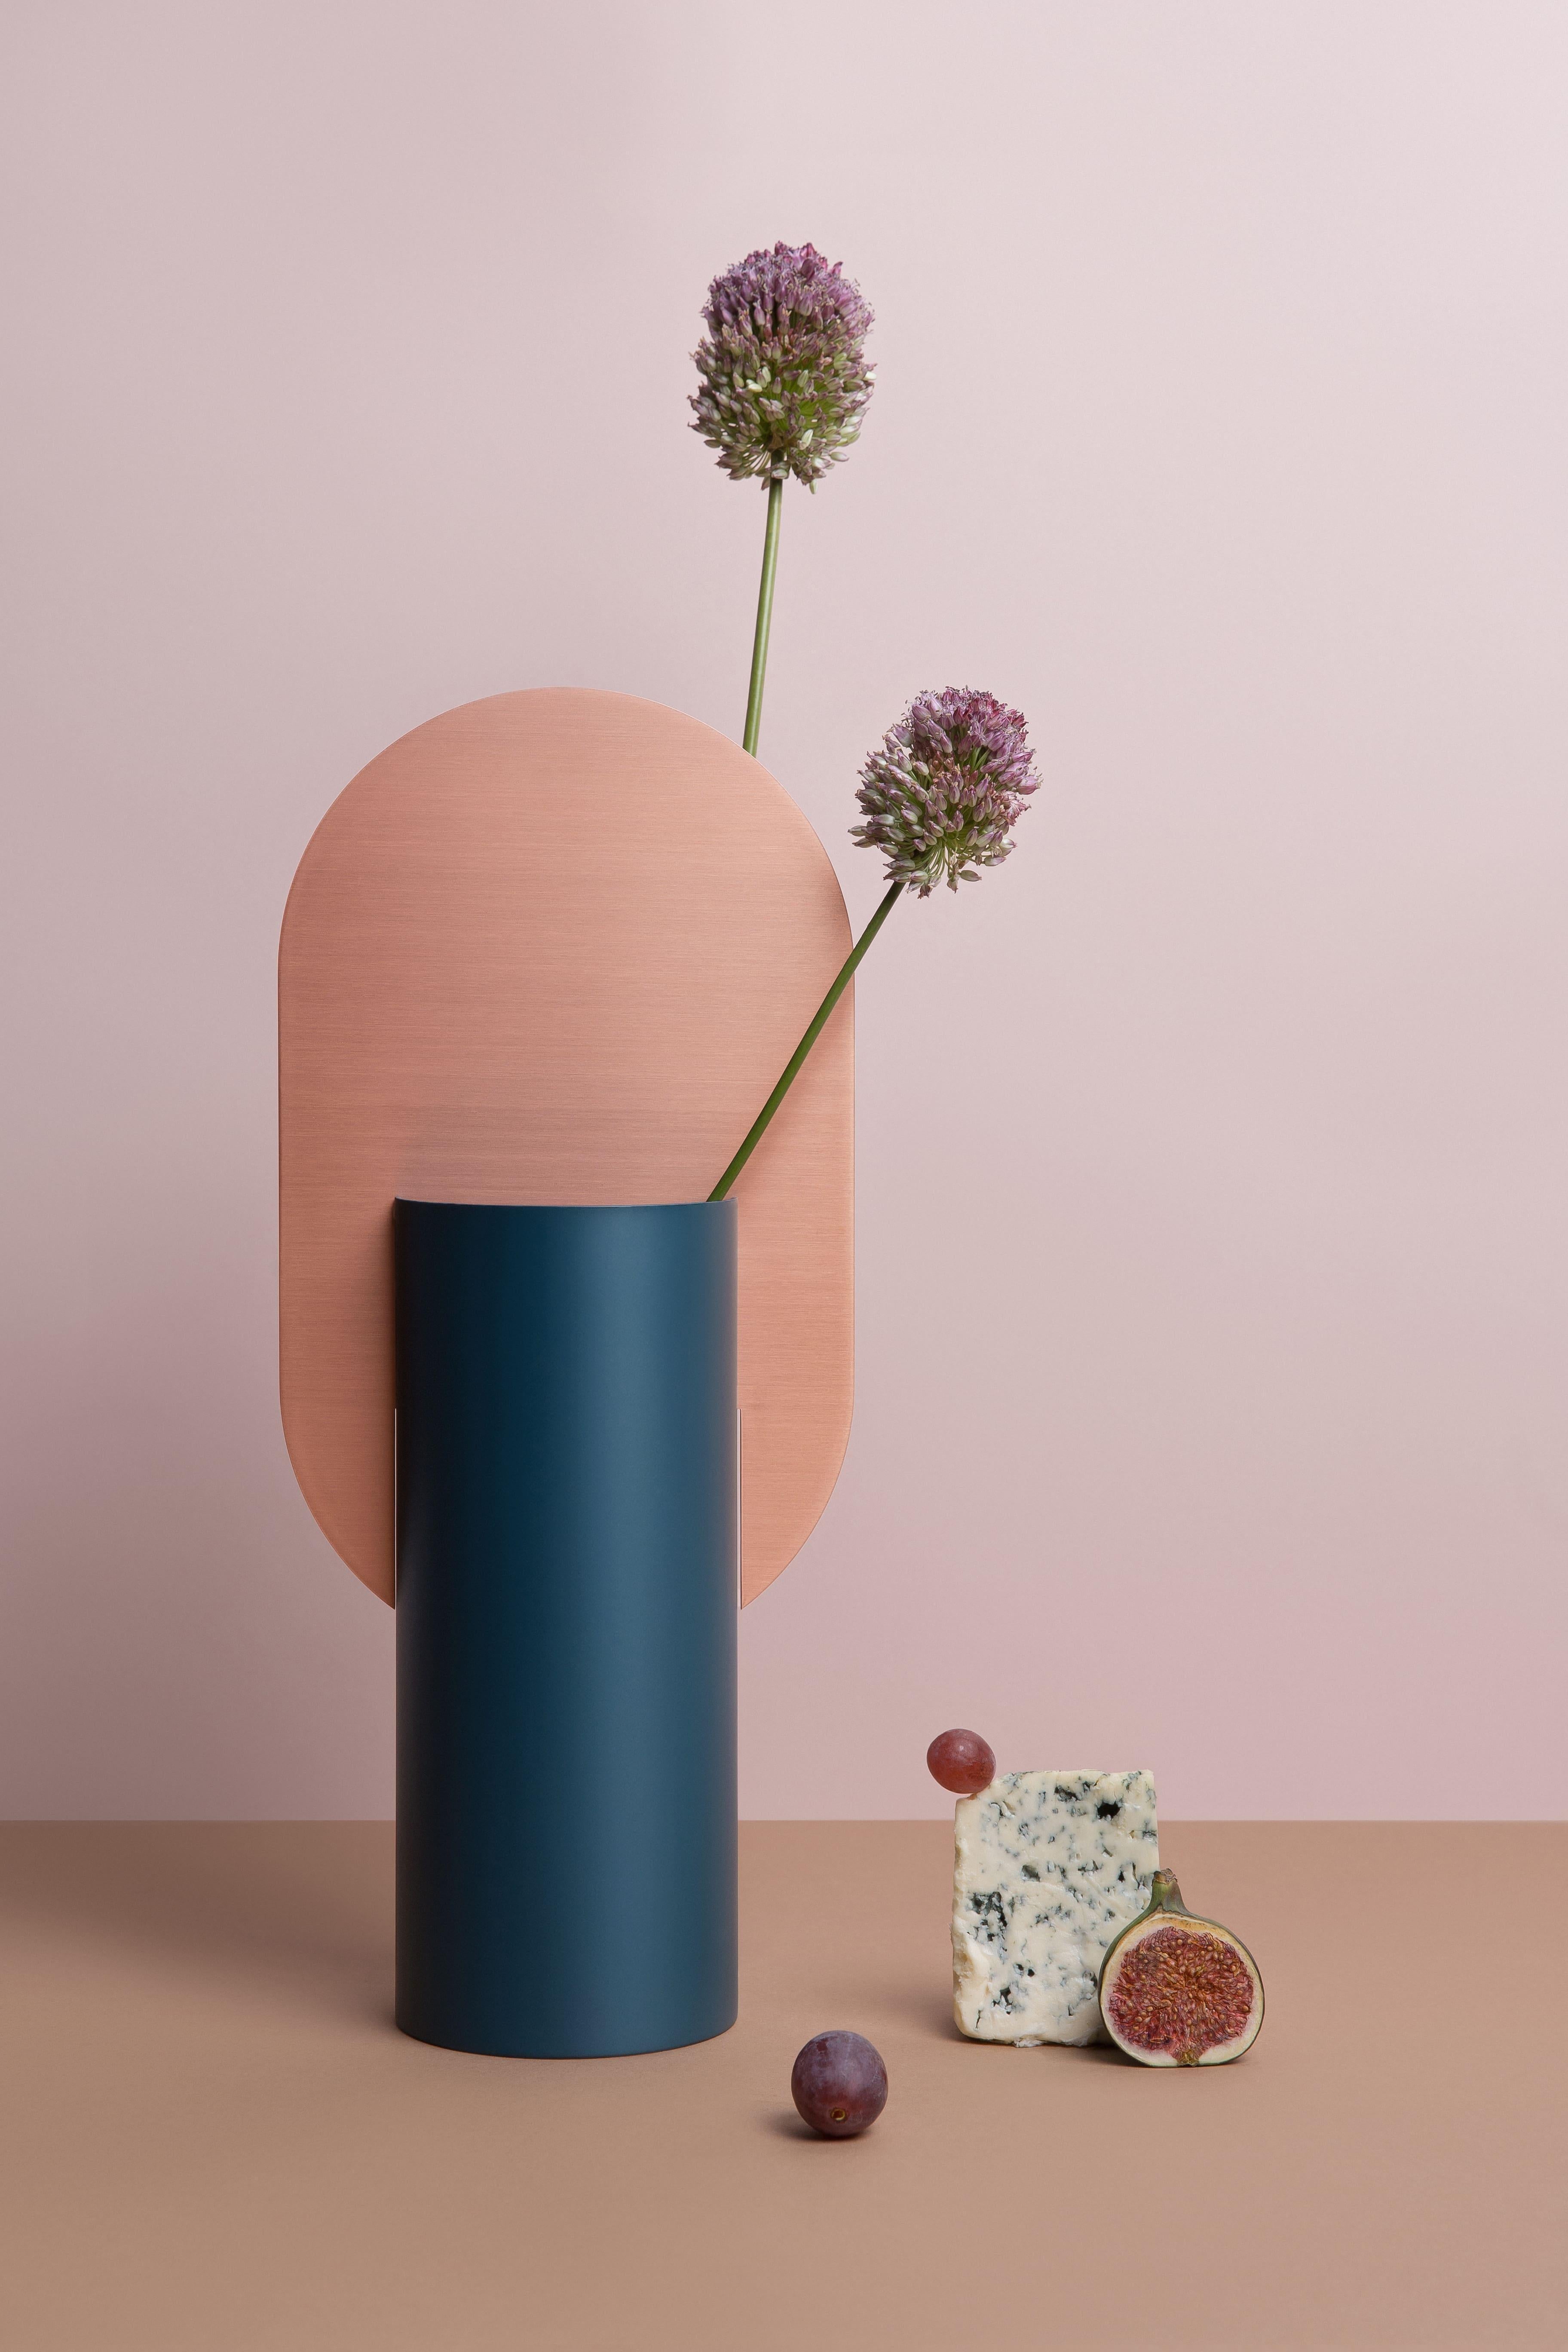 Vase Genke CS2 by Noom in Copper and Steel

Brand: Noom
Designer: Kateryna Sokolova
Materials: Brushed copper, painted steel
Color scheme: CS2 - ocean blue and copper
Dimensions: H 38 cm x W 17 cm x D 10 cm
Net Weight: 2 kg.

Genke vase, one of the